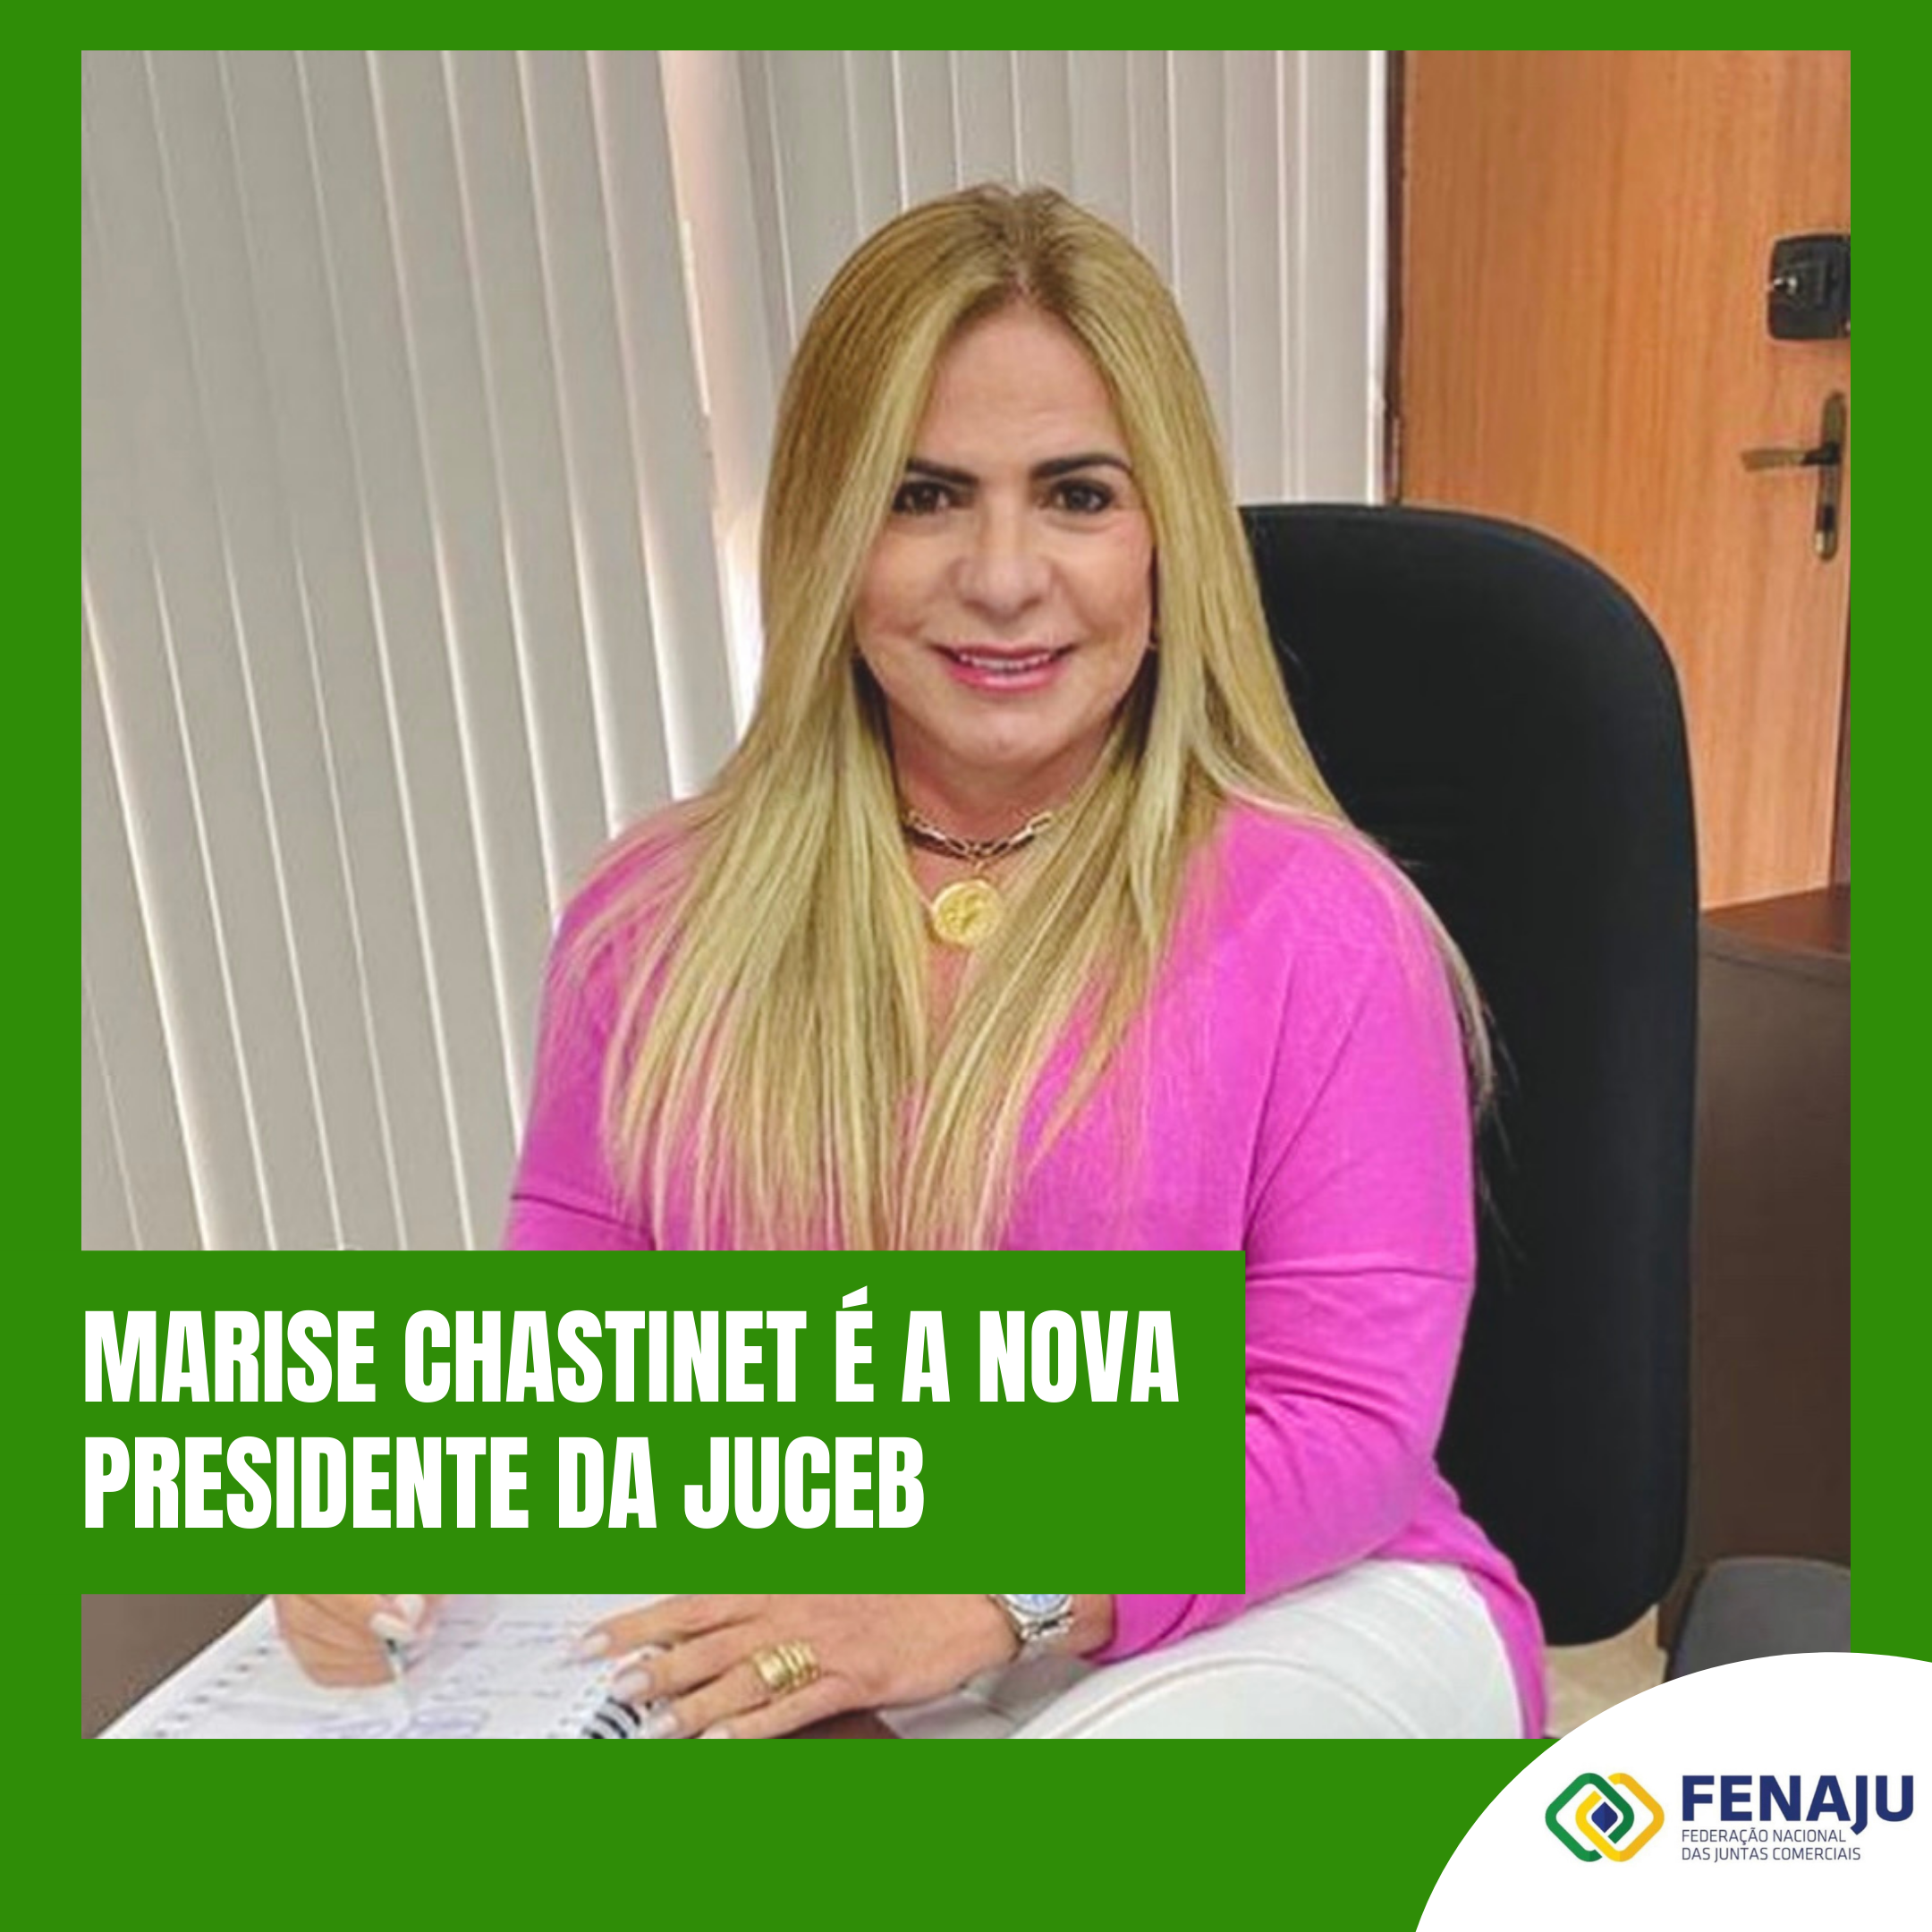 You are currently viewing Marise Chastinet é a nova presidente da JUCEB 